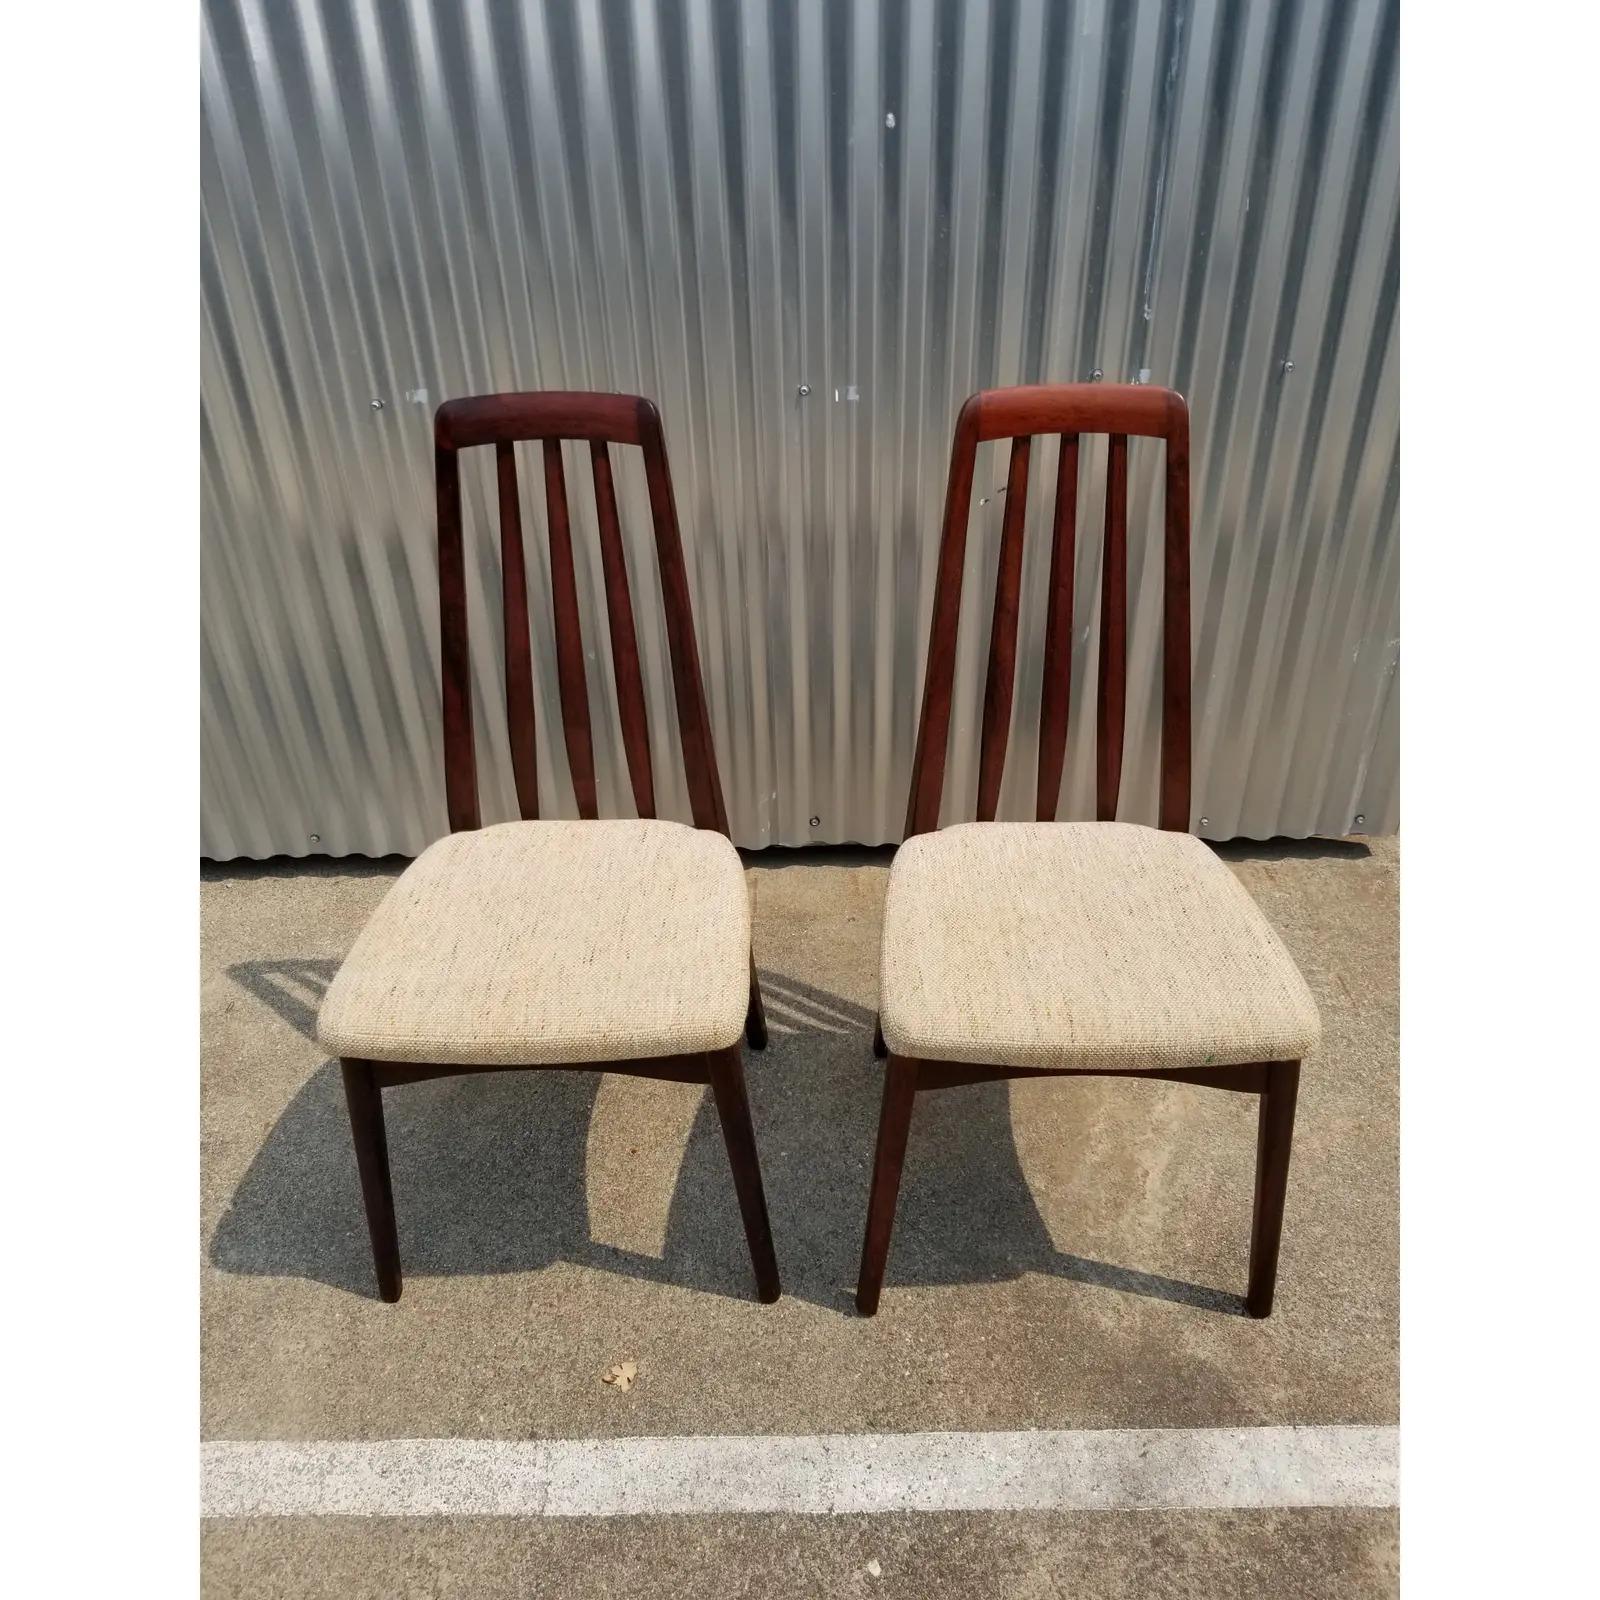 Rosewood Danish Modern Dining Chairs by Svegards, a Pair 1